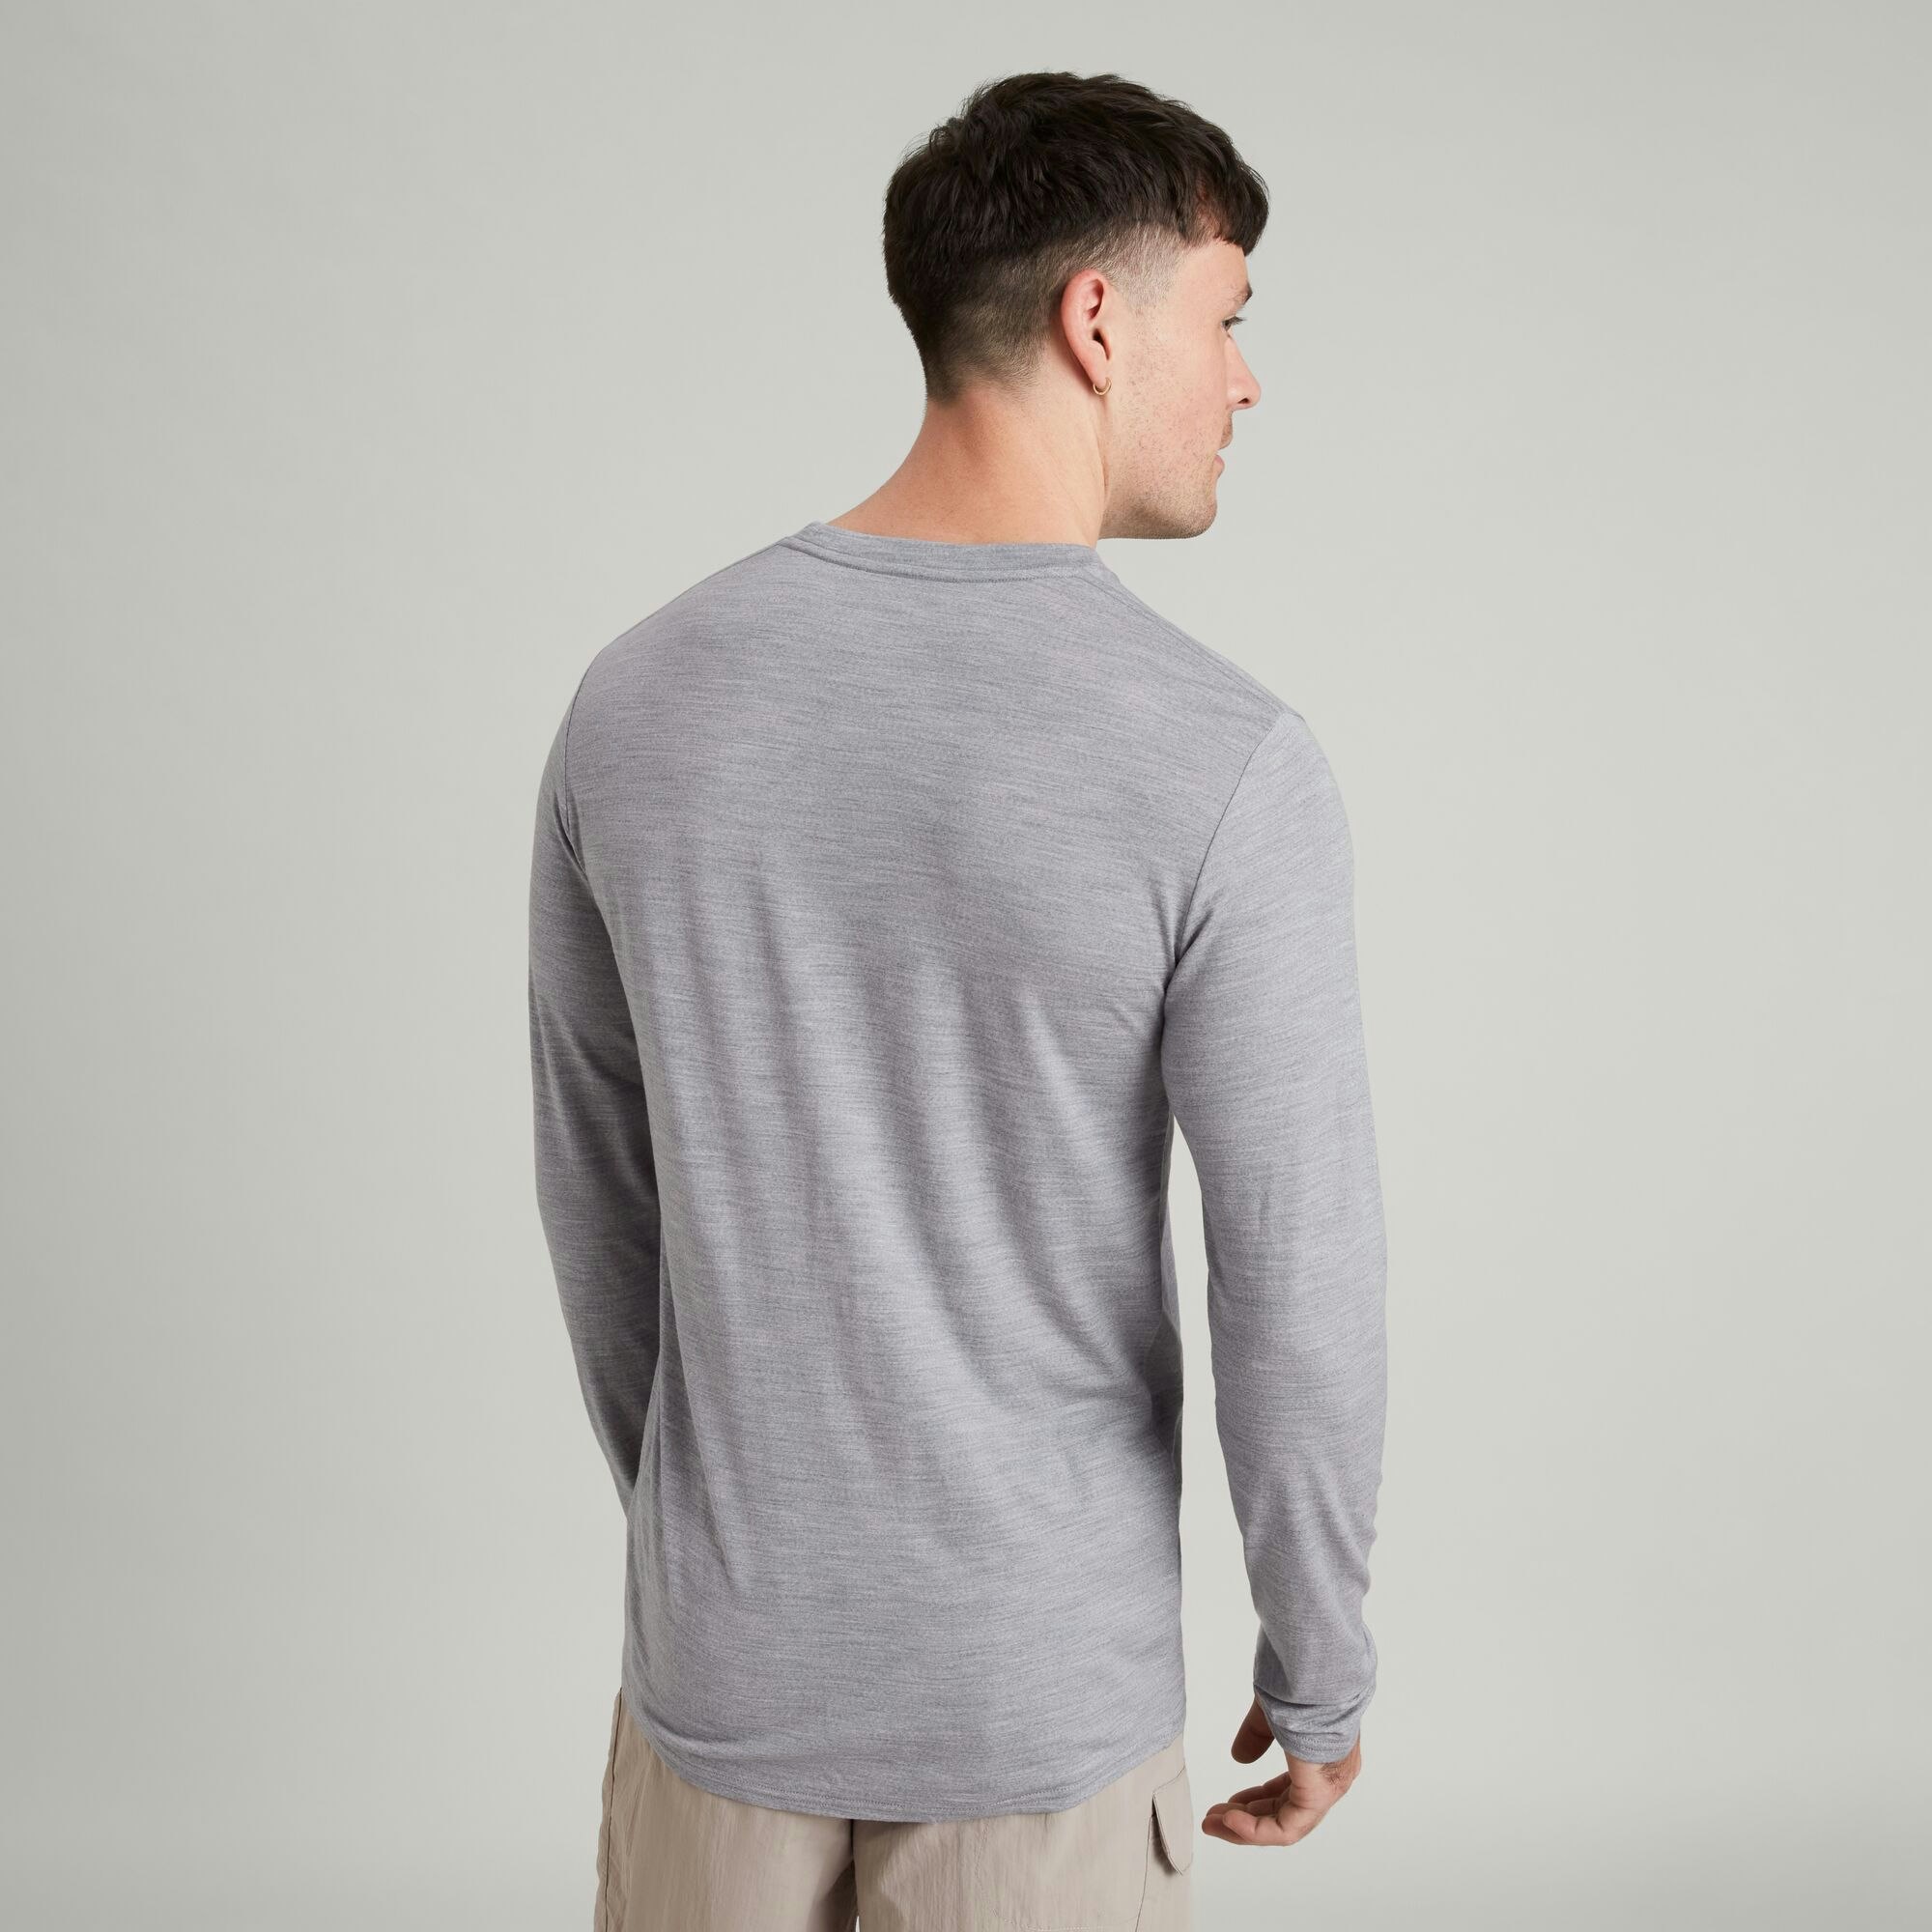 Merino Wool Base Layer Thermal Wear For Men For Men Long Sleeve 240G  Midweight Top With Wicking And Breathable Fabric Ideal For Hiking 231122  From Powerstore02, $38.37